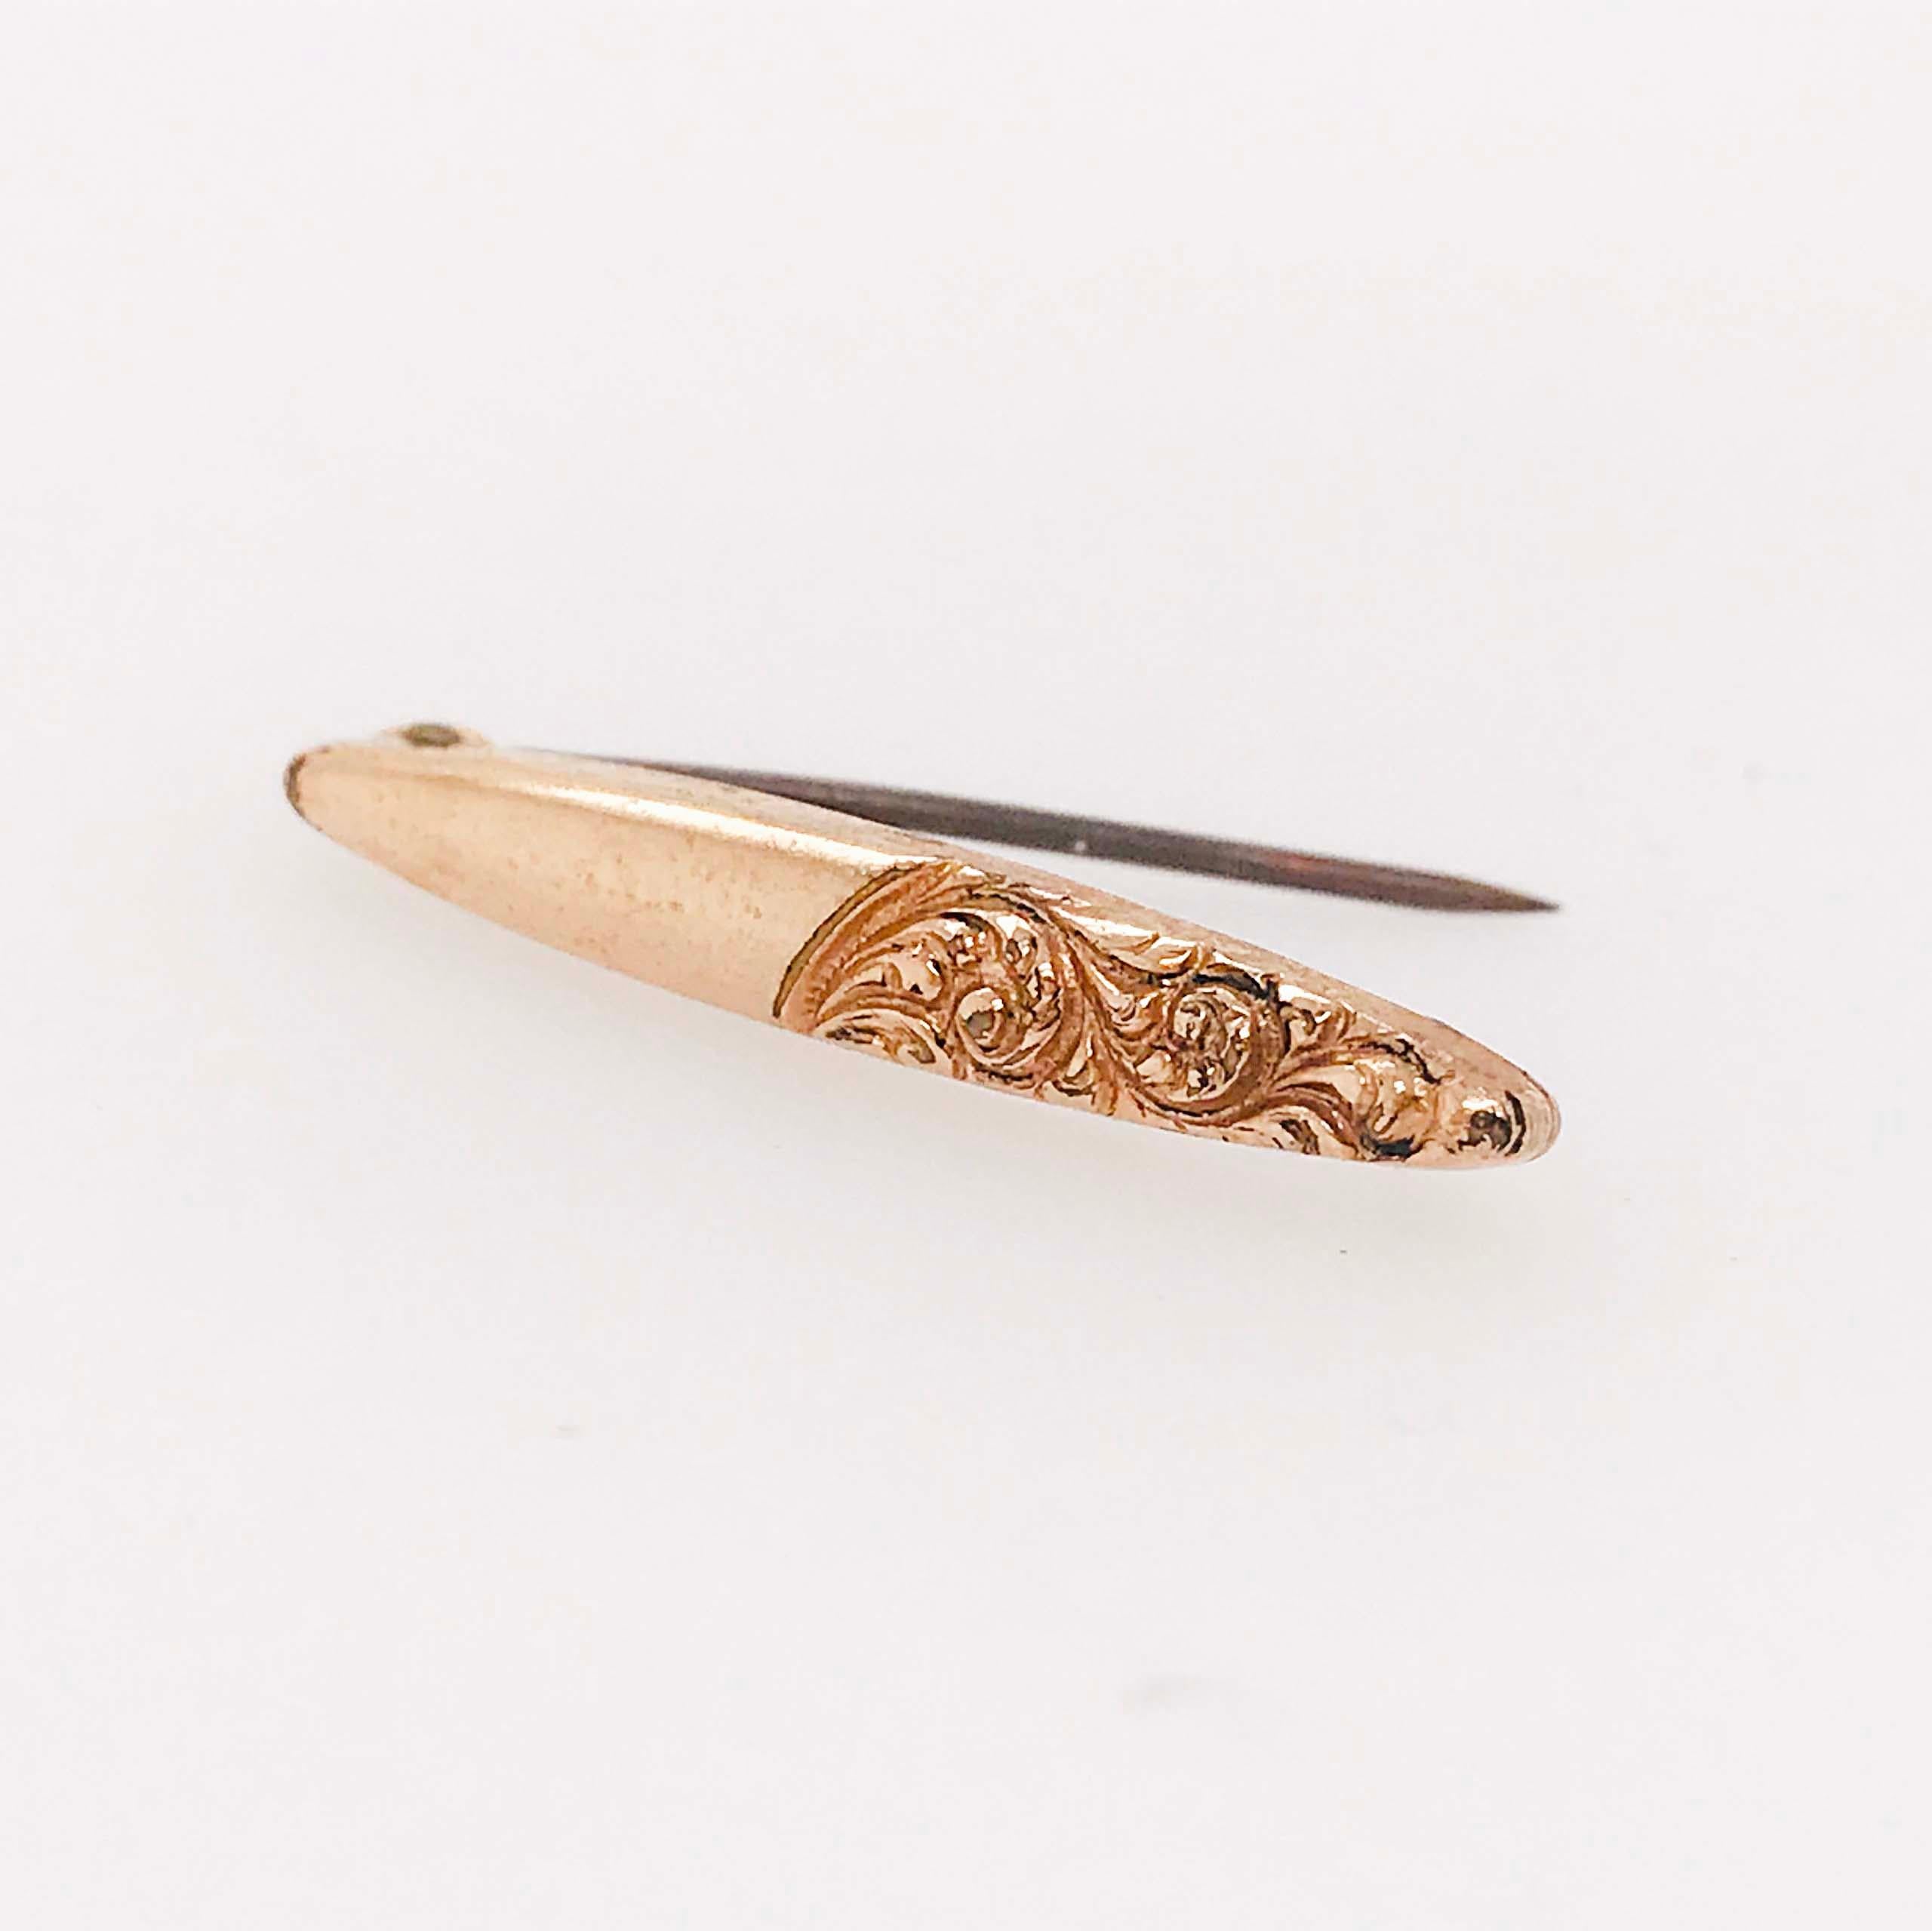 Victorian Rose Scroll Pin, Scroll, Rose Gold Brooch with Hand Engraving, circa 1910